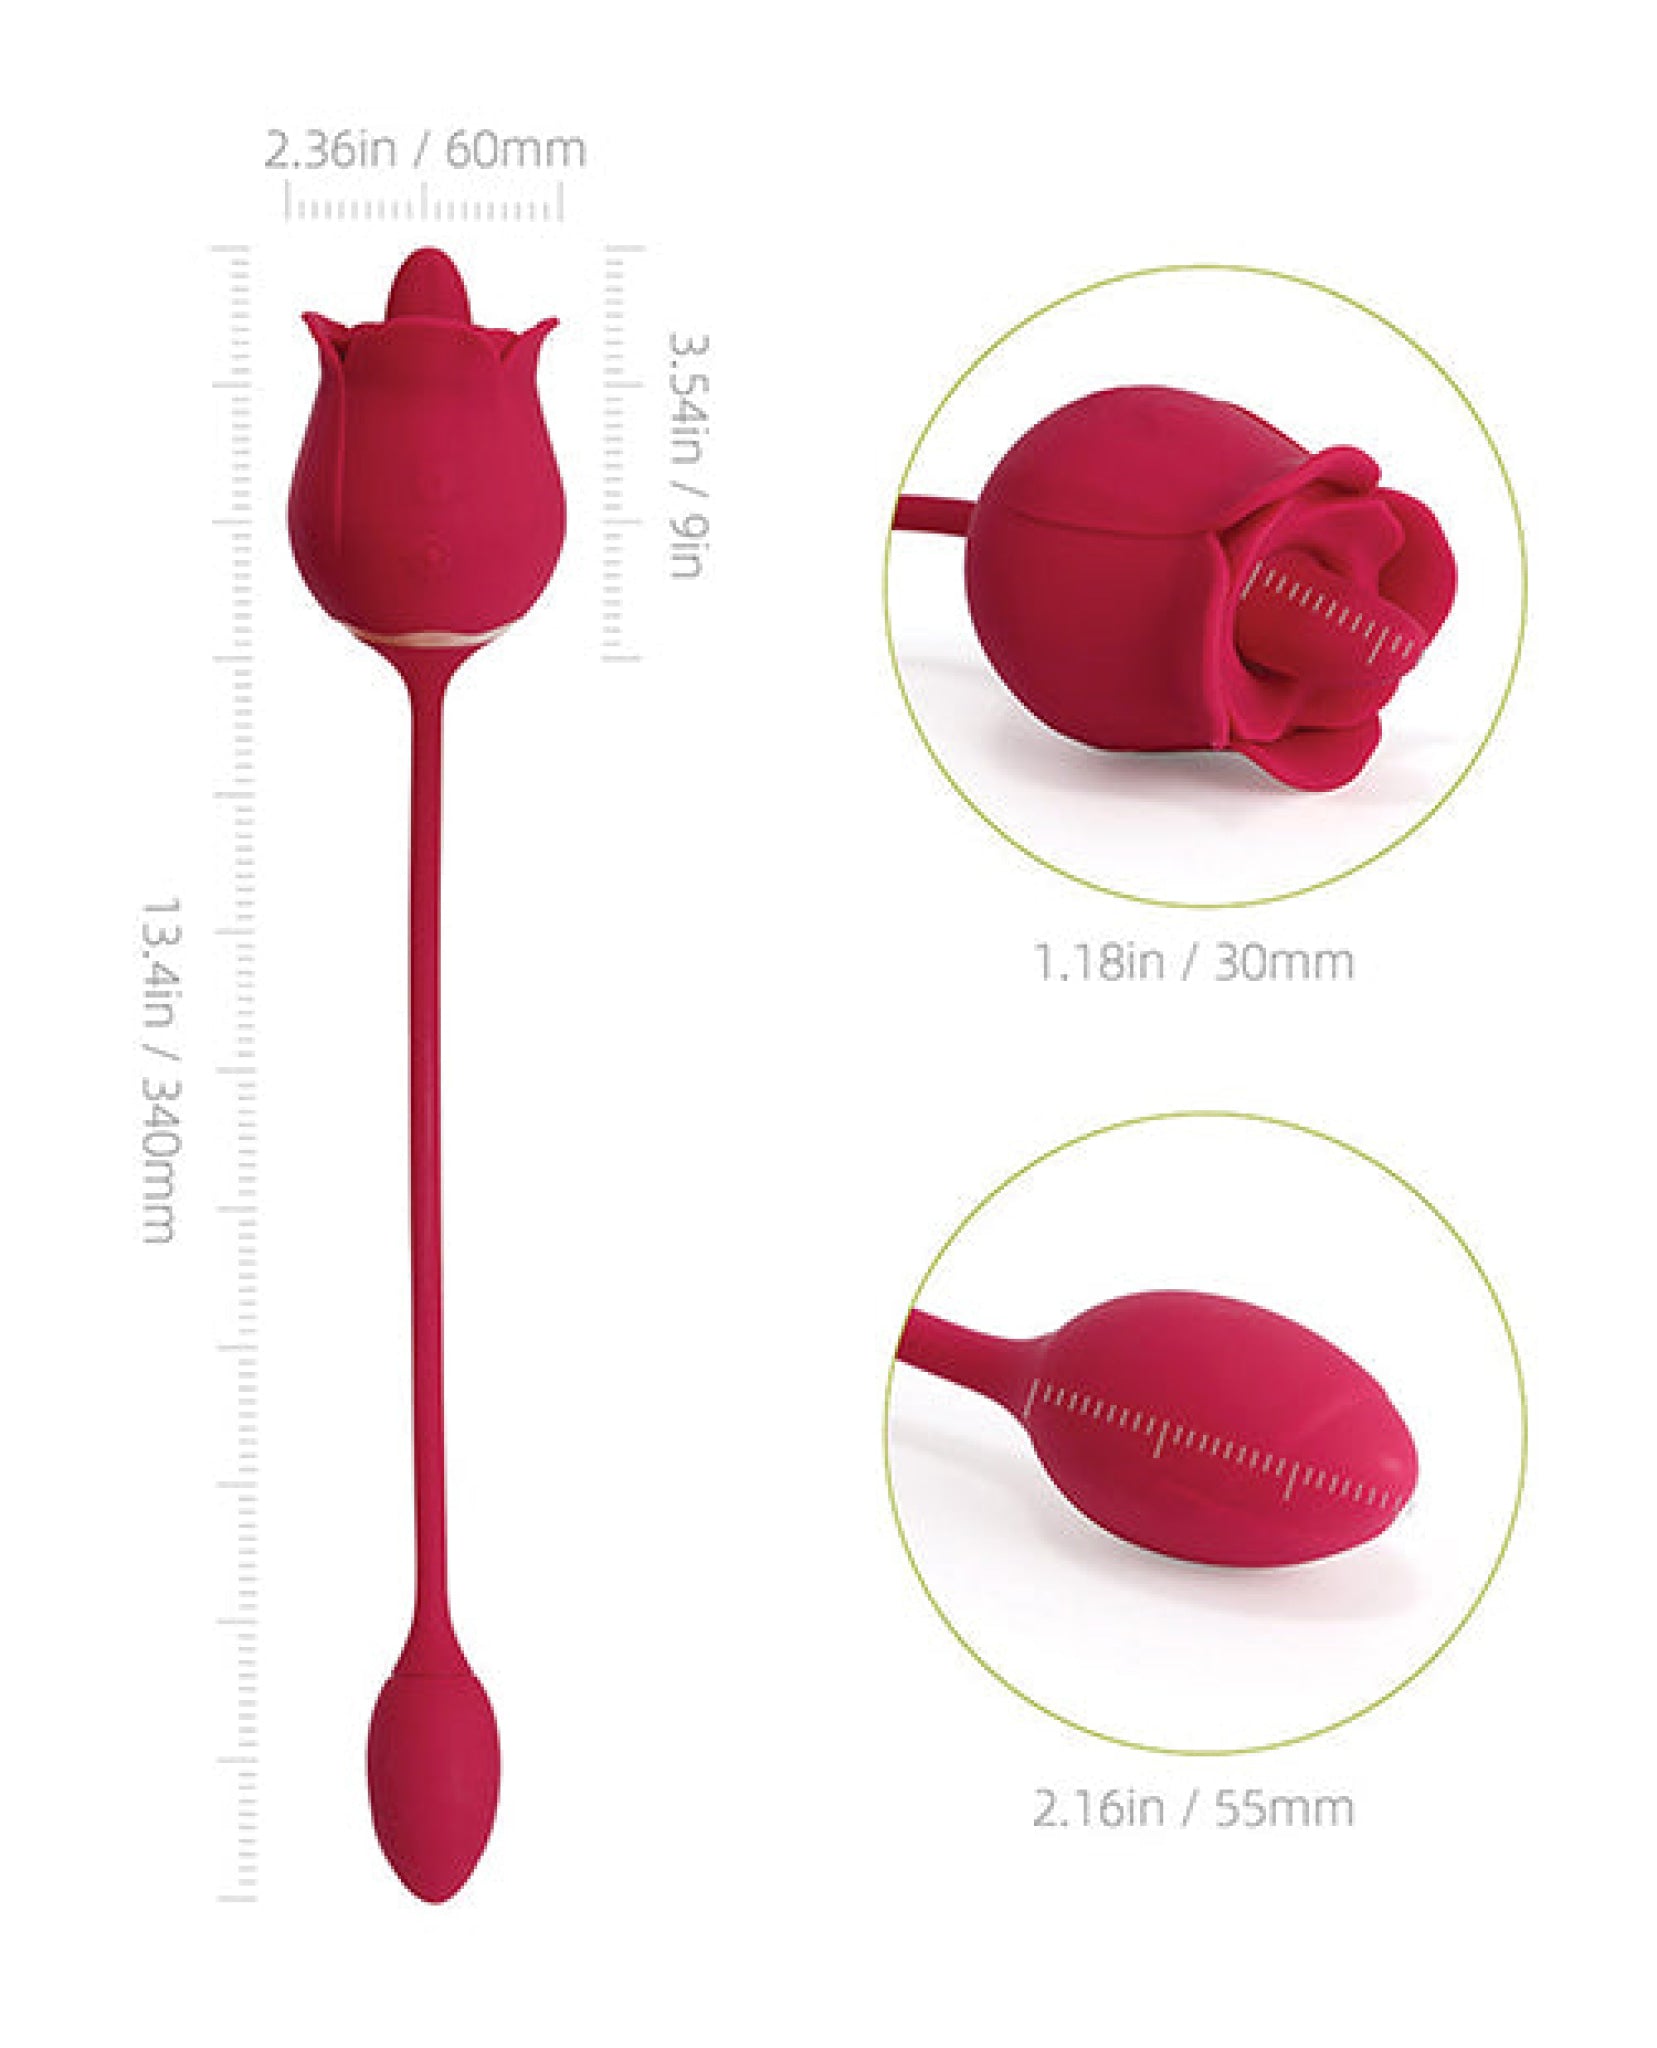 Fiona Clit Licking Rose & Vibrating Egg - Red Uc Global Trade